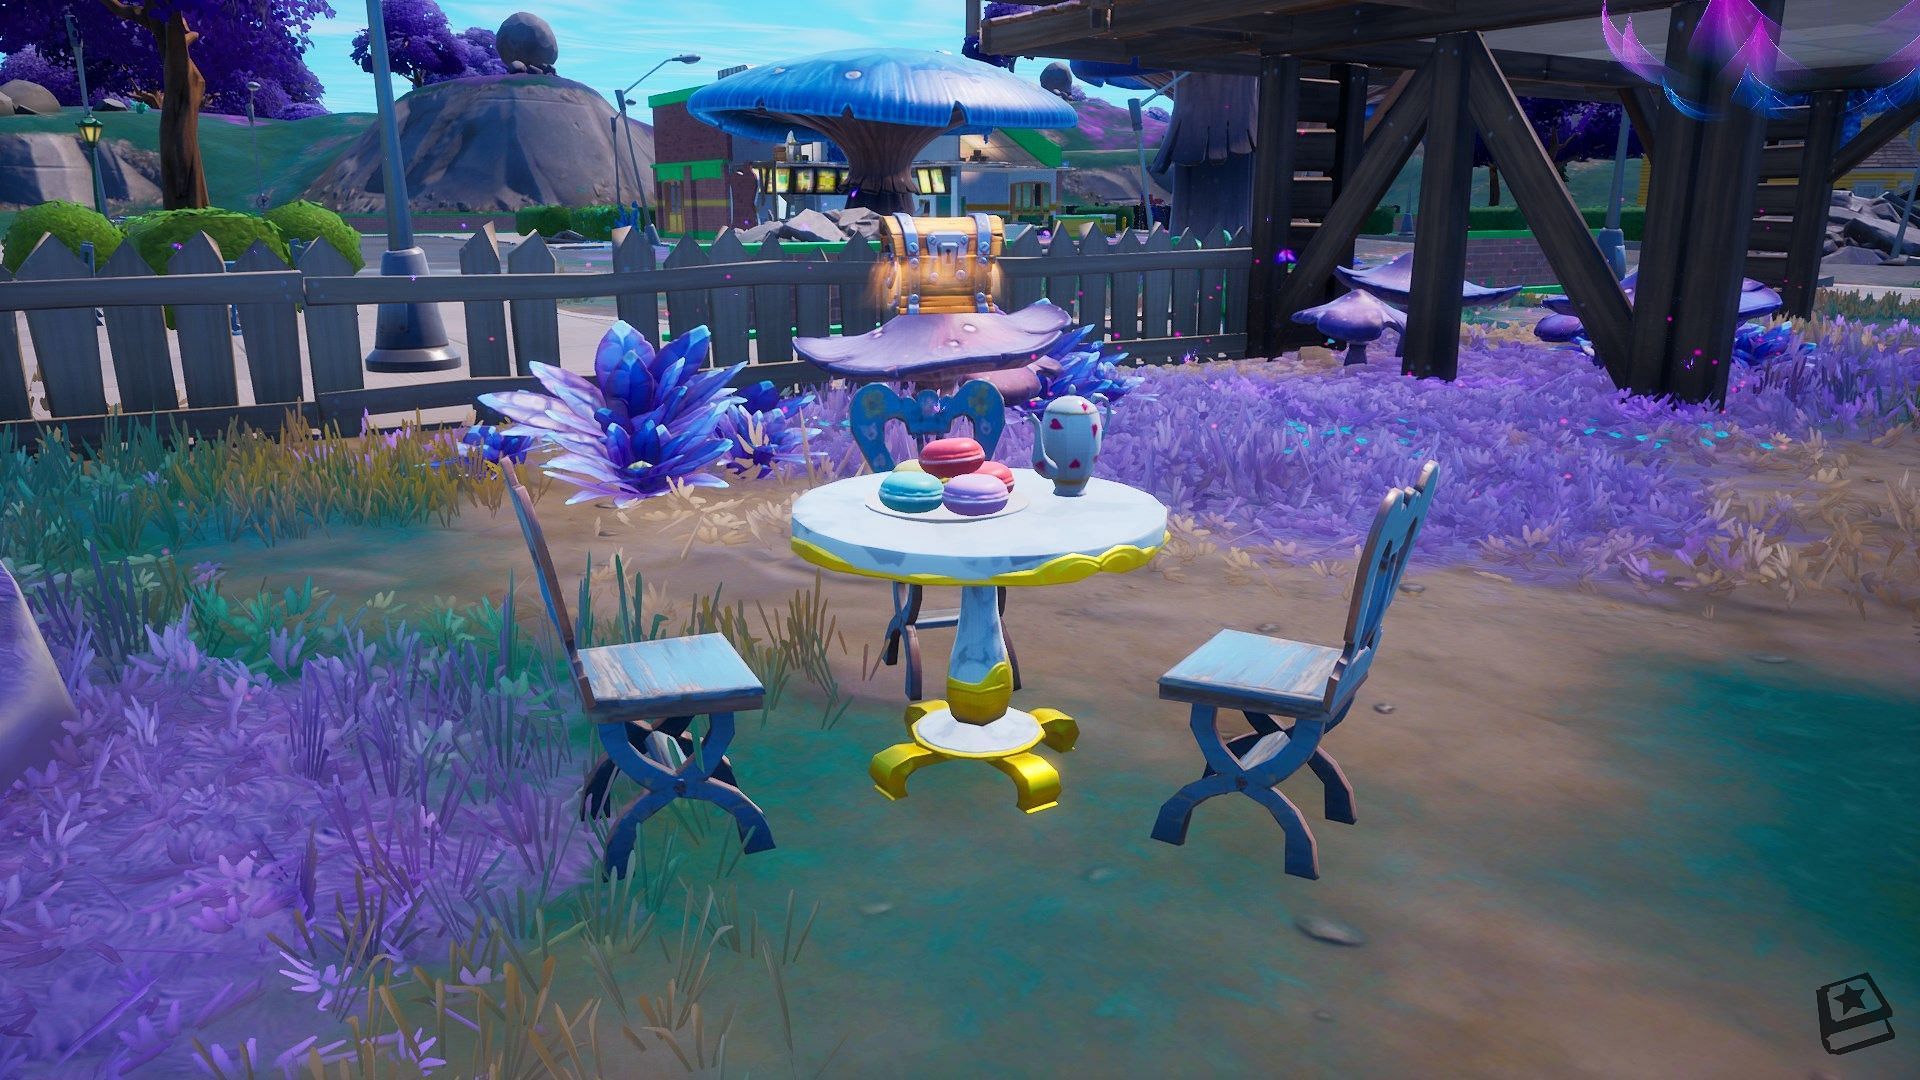 An Alice in Wonderland collaboration may occur in Fortnite (Image via Twitter/FN_Assist)